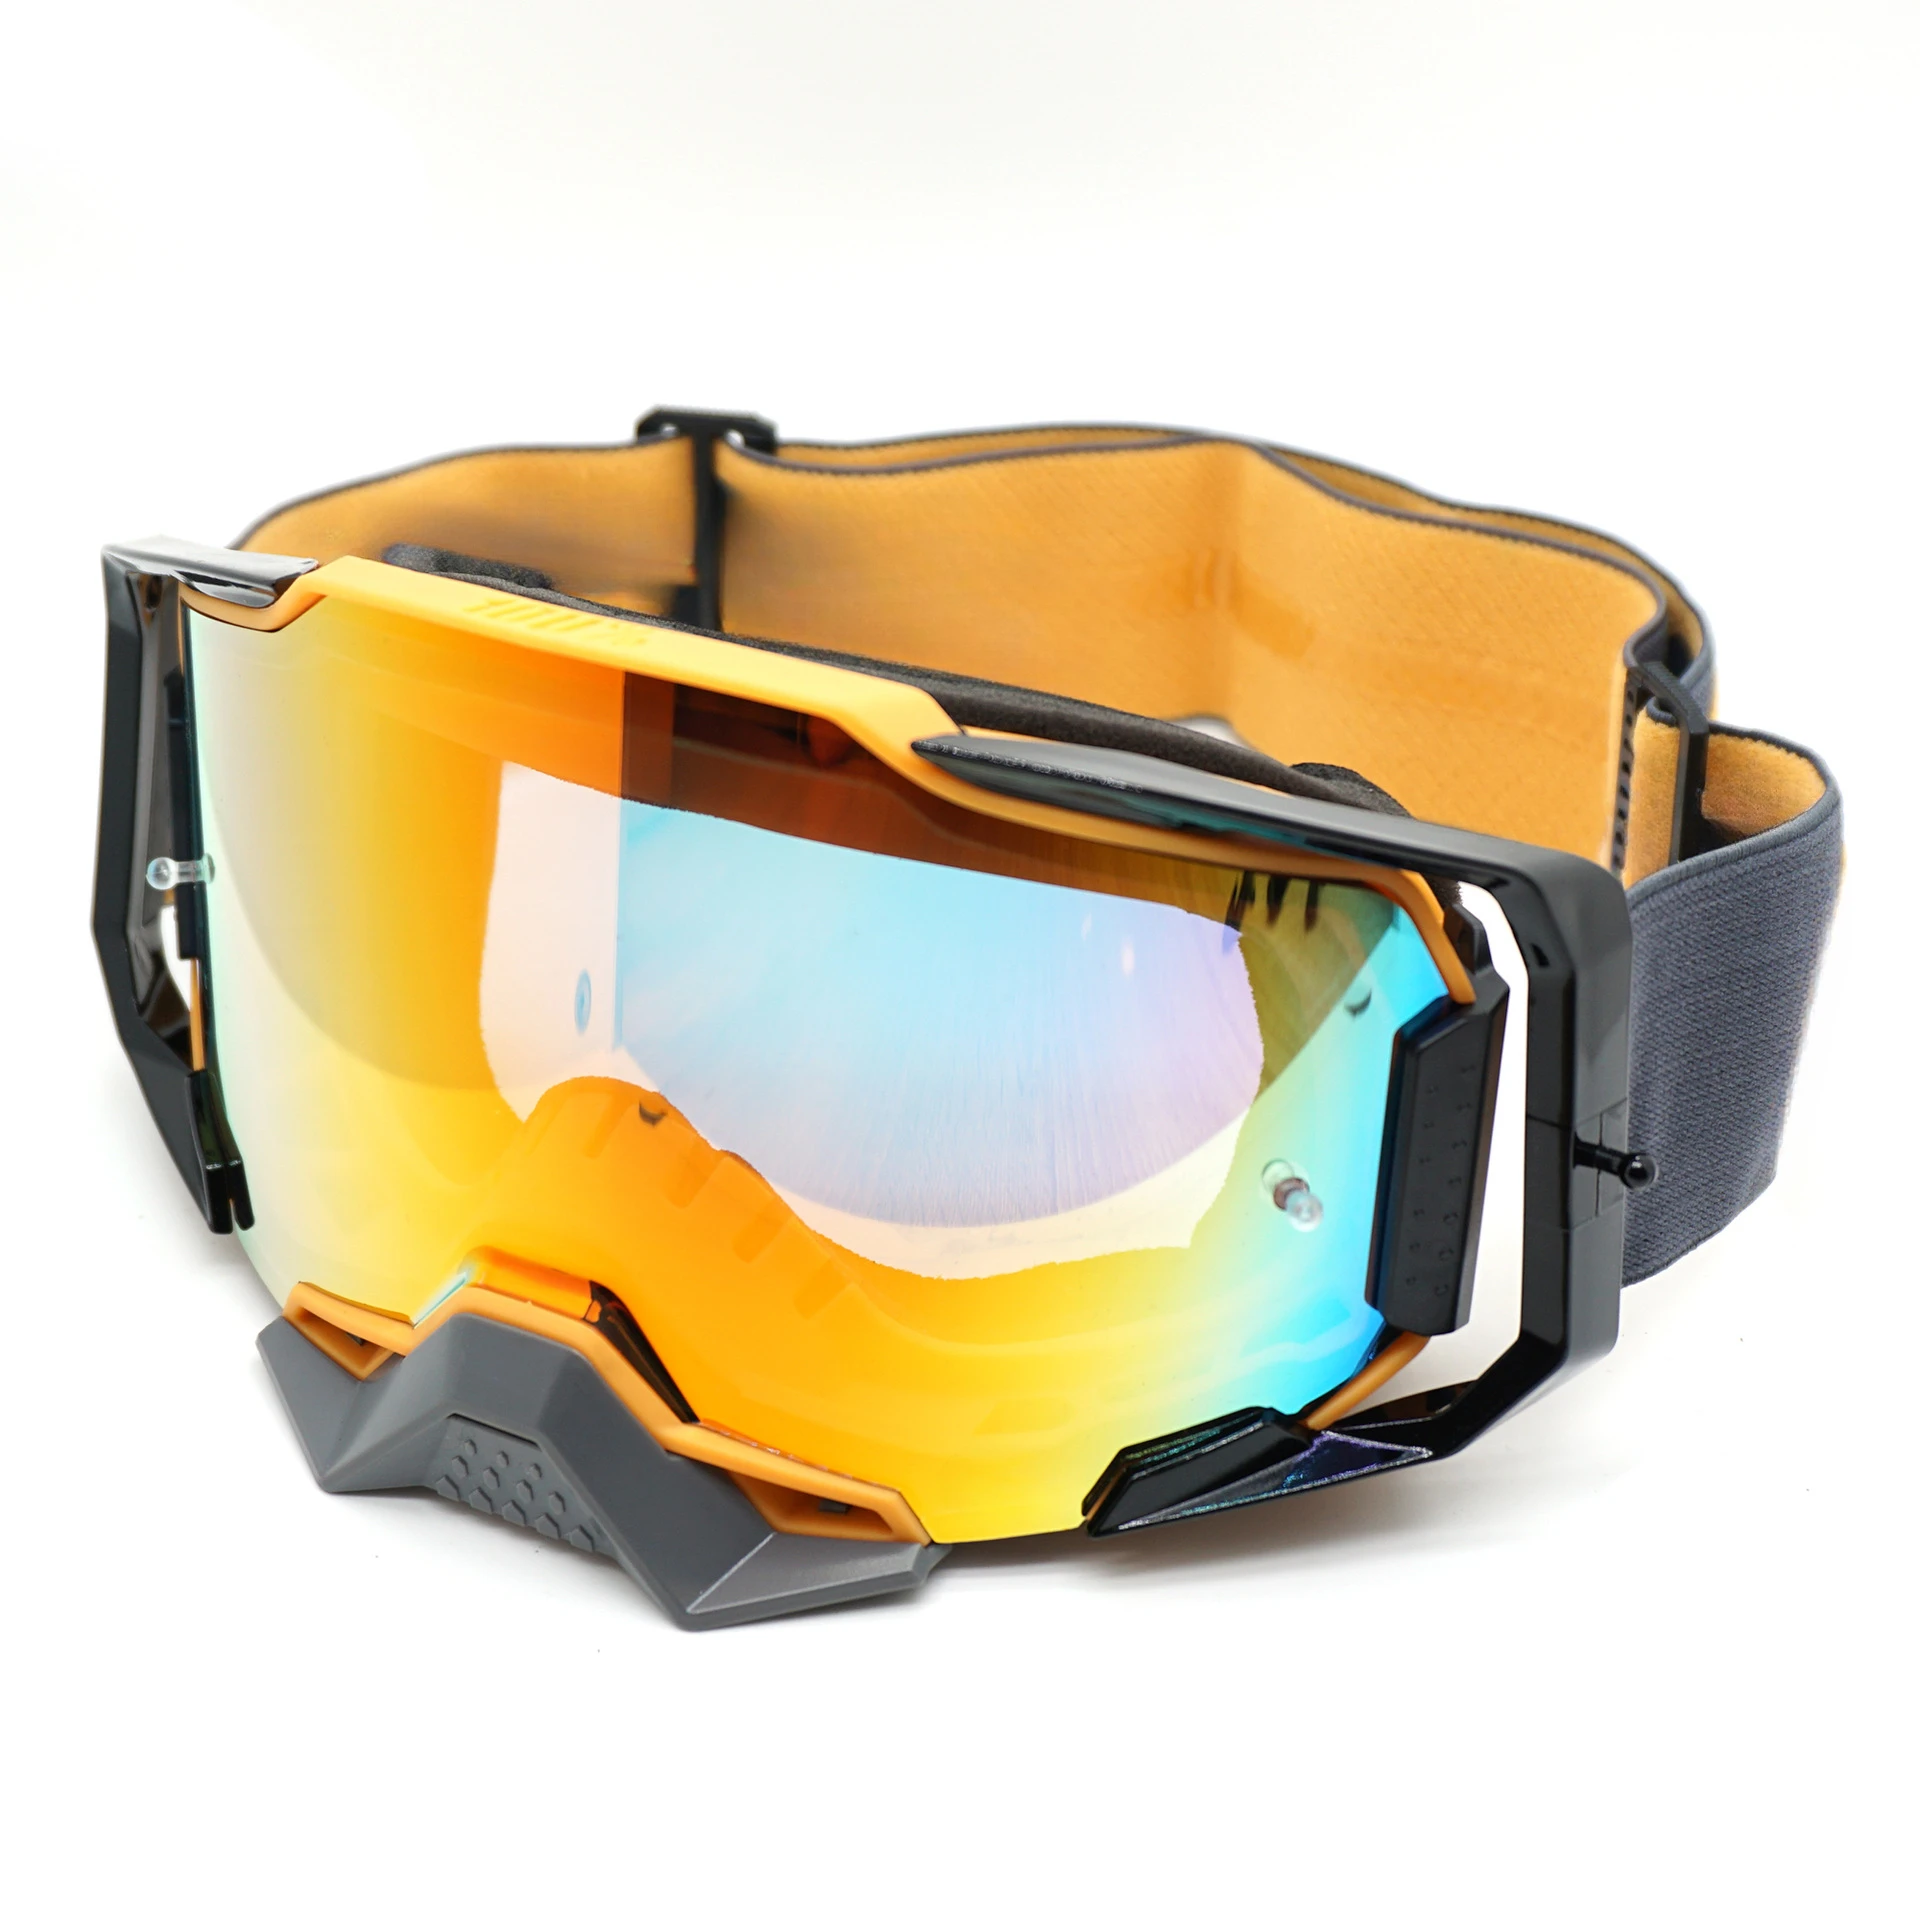 

New TPU Windshield Motorcycle Windshield Motocross Motorcycle Goggles Outdoor Riding Protective Equipment Cycling Glasses